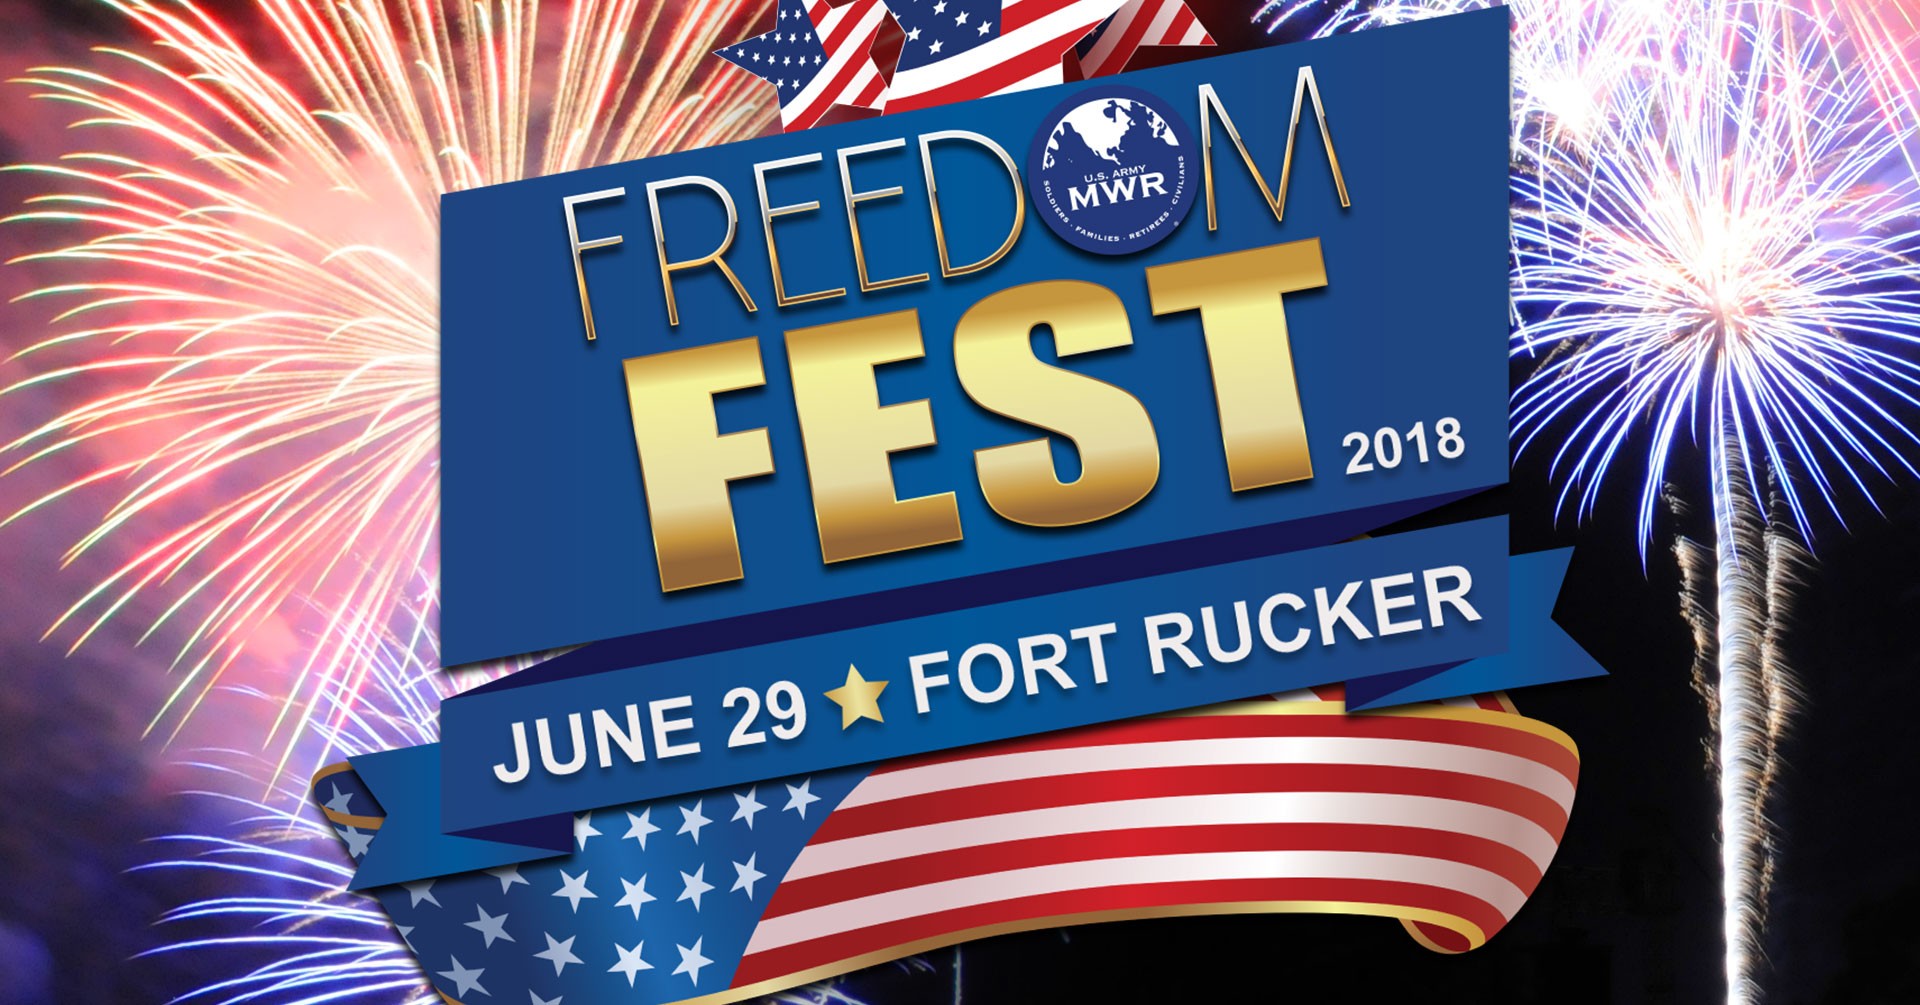 Freedom Fest returns with music, food, festivities Article The